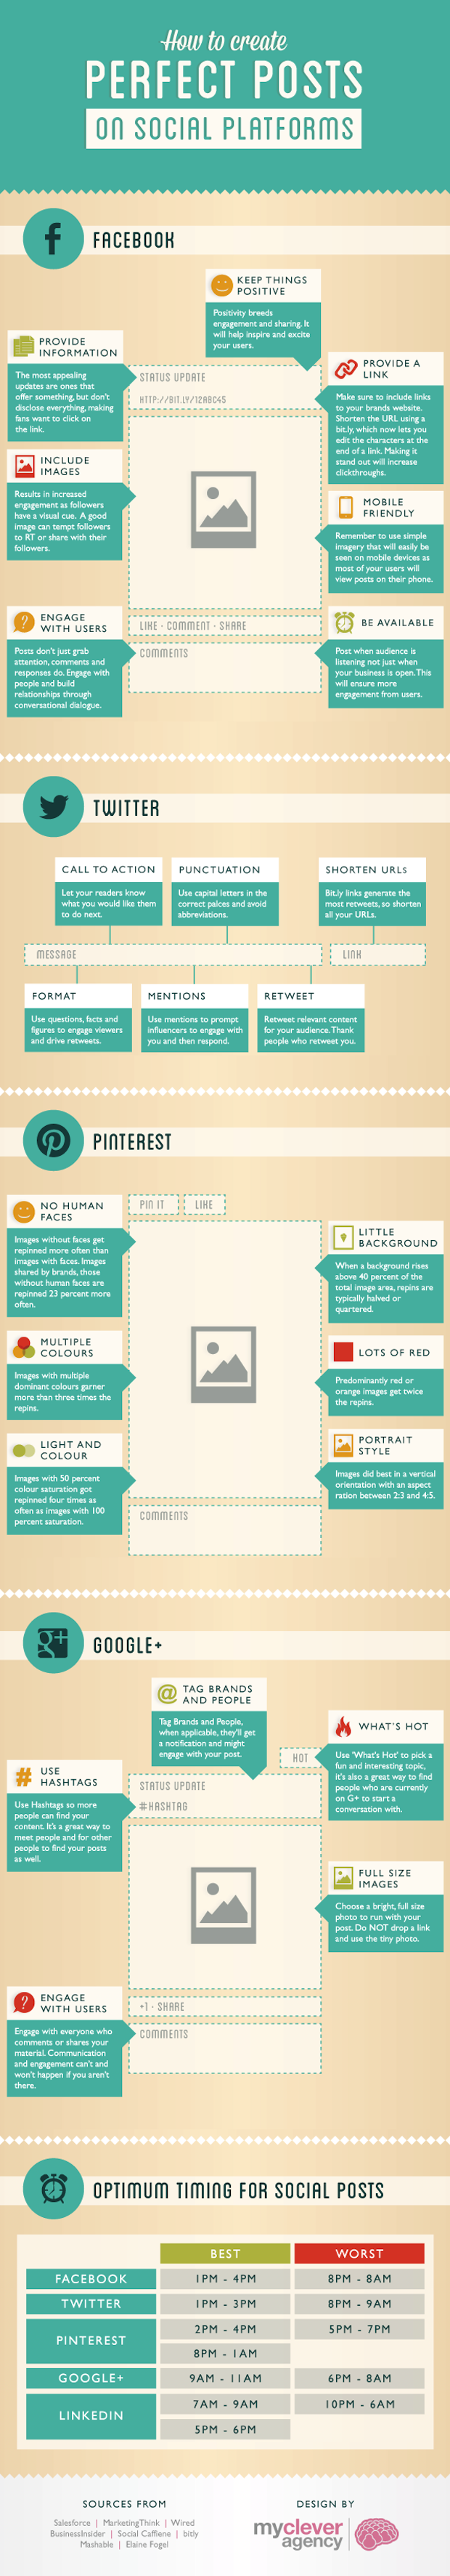 How to Create Perfect Posts with Social Media [Infographic]